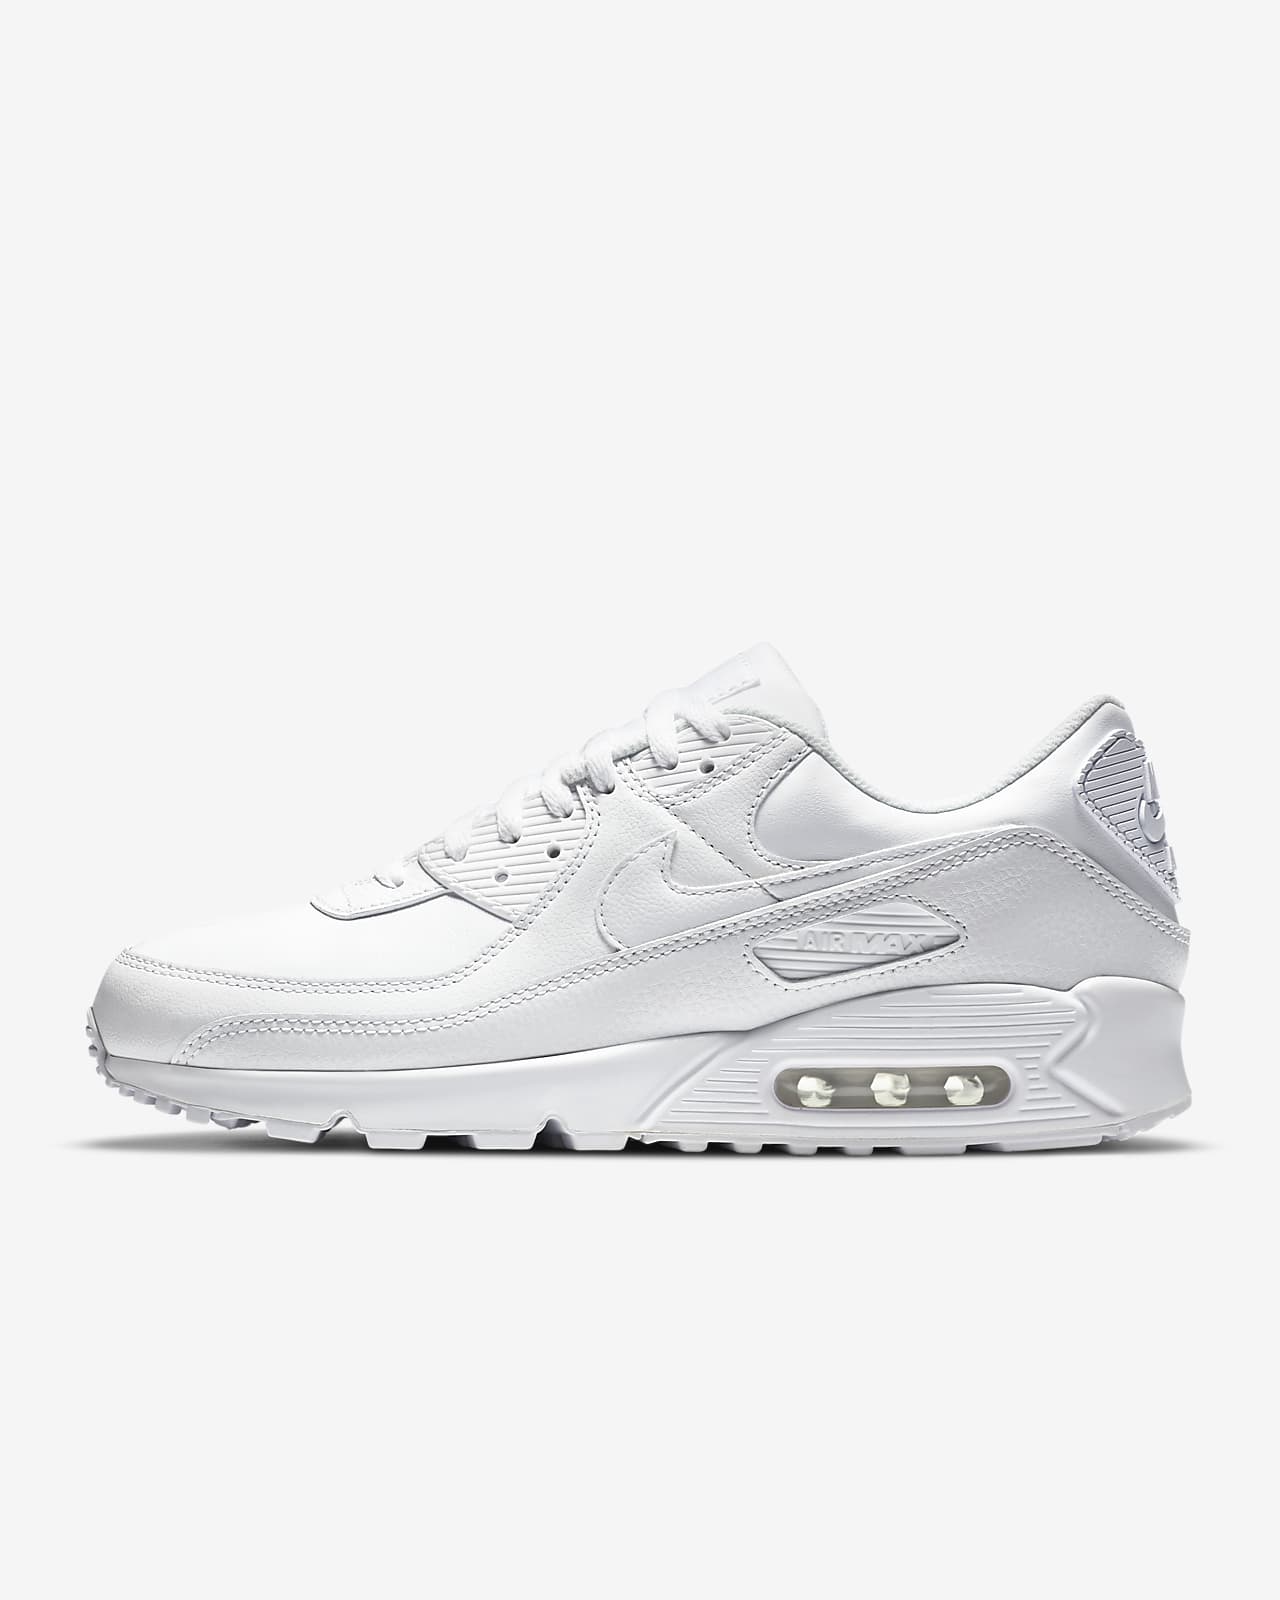 air max 90 leather blanche